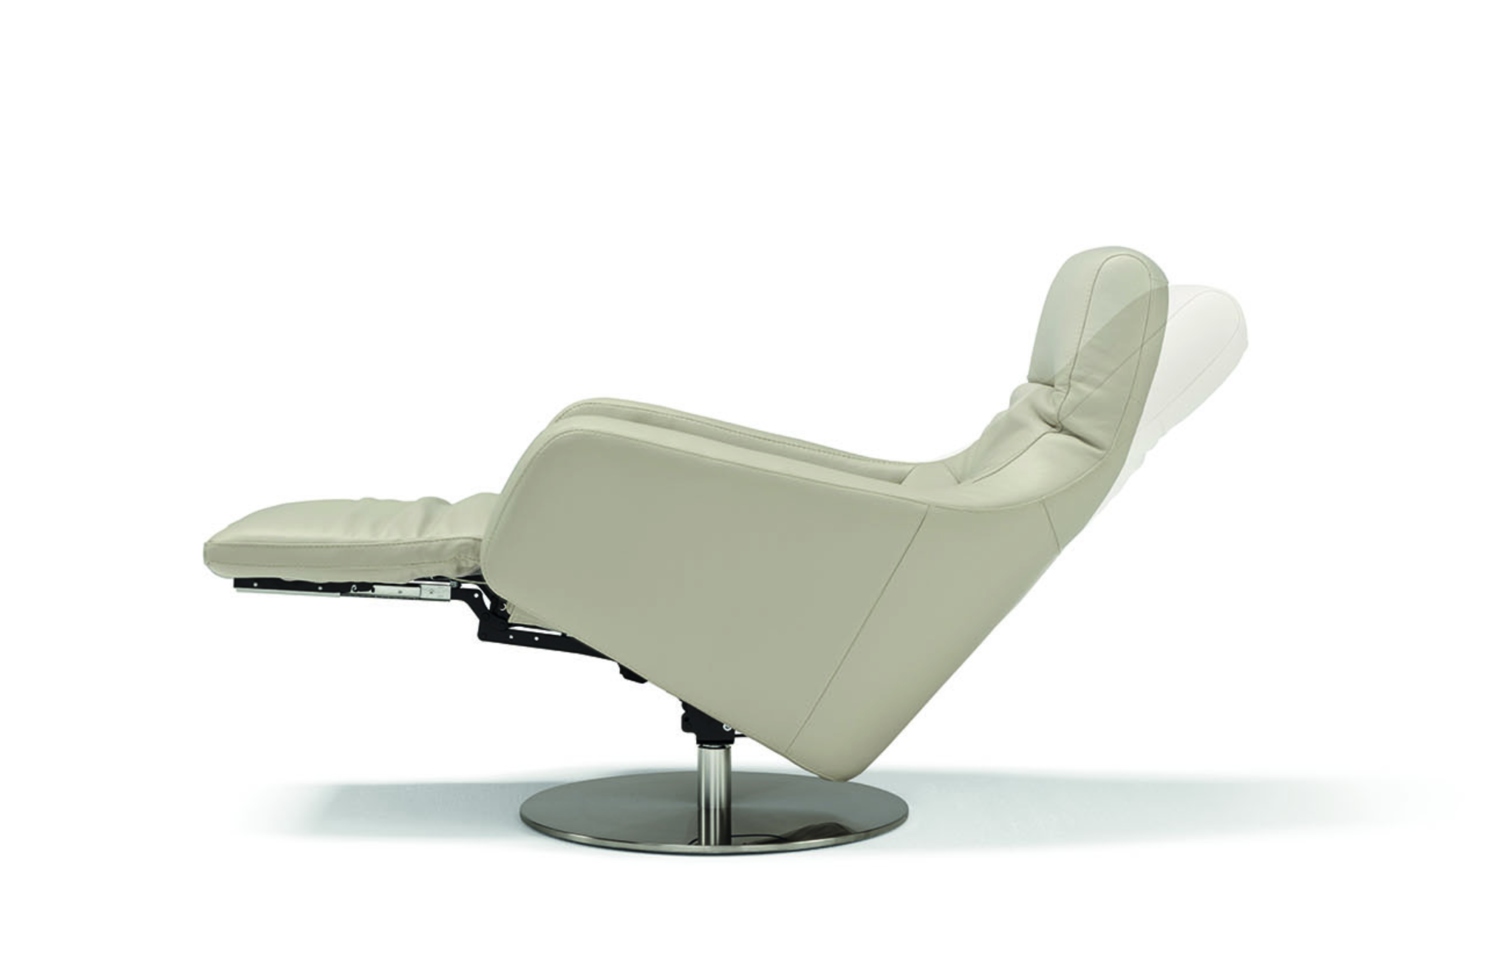 Nora, Swivel Chair with Relax two motors Recliner.